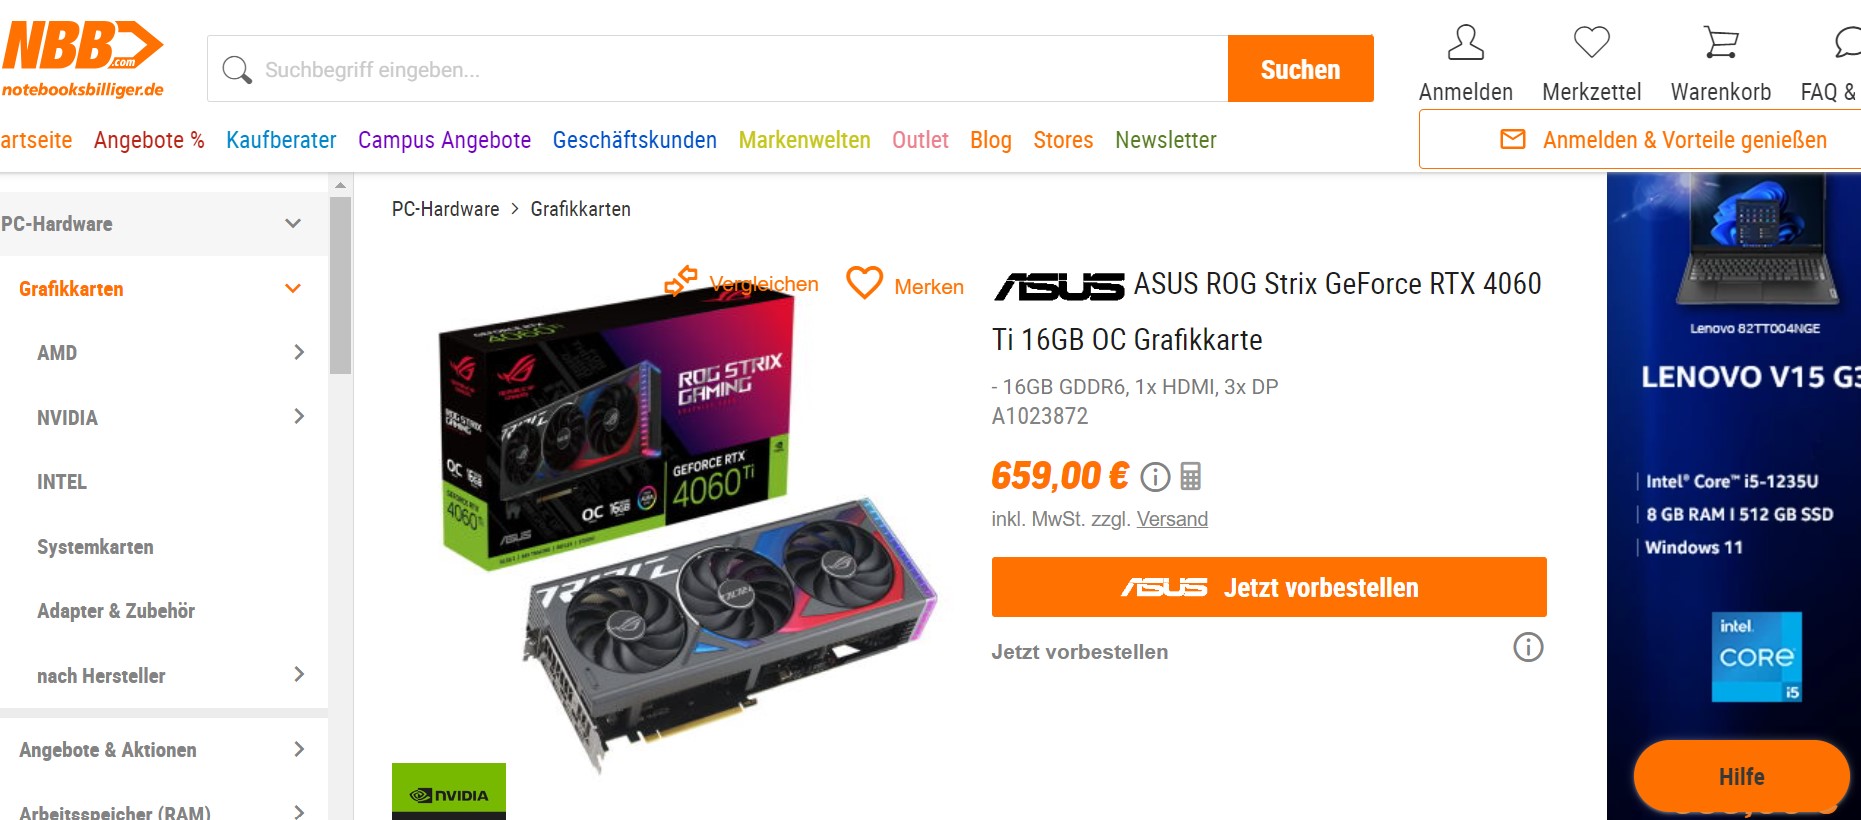 ASUS ROG Strix G18 with RTX 4080, Core i9-13980HX, and massive 18-inch  display enjoys US$400 discount at Best Buy -  News